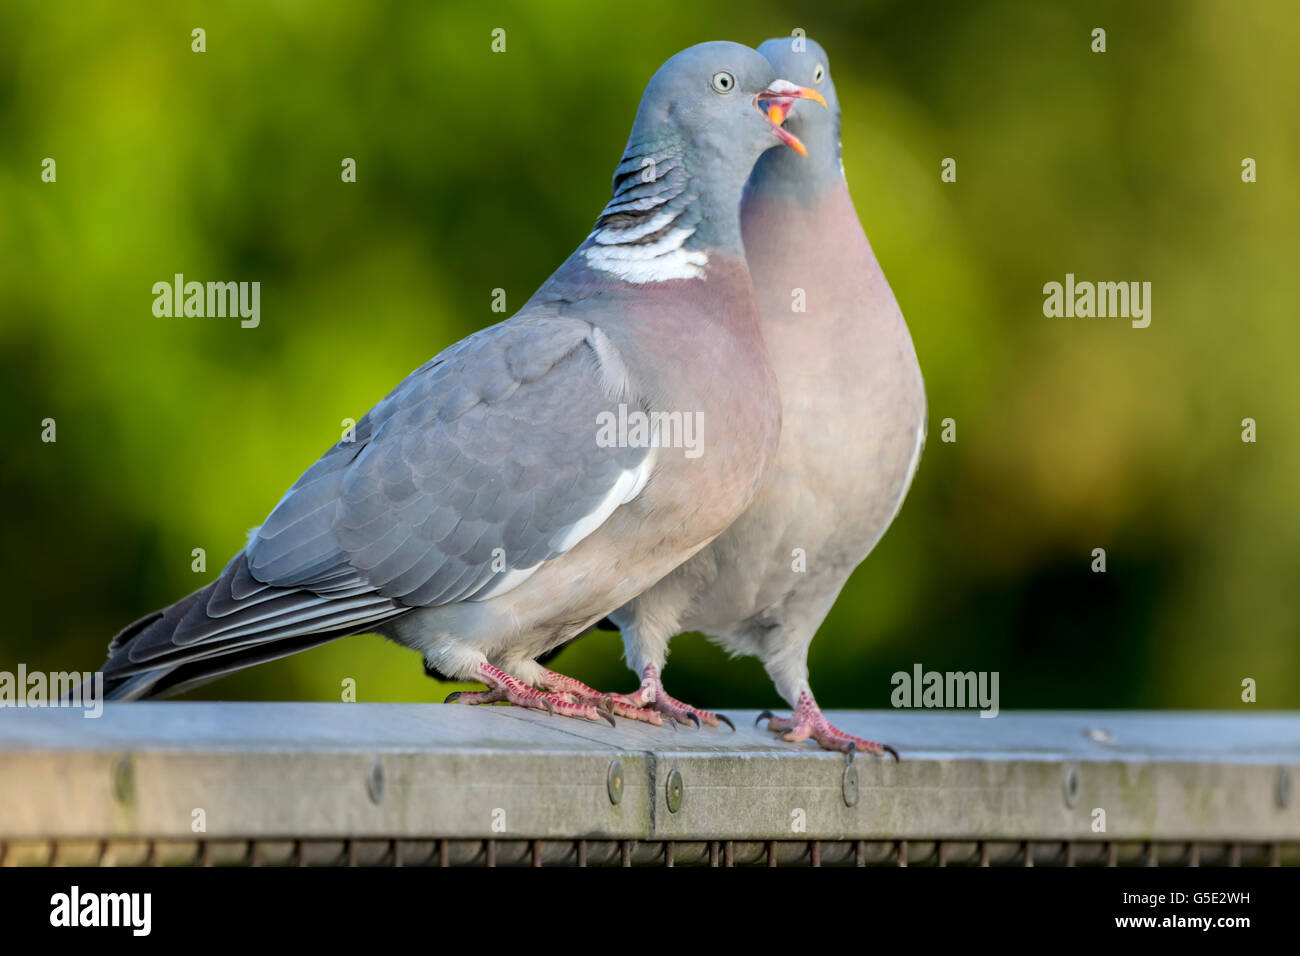 Two wood pigeons courting on a metal fence in the forest Stock Photo